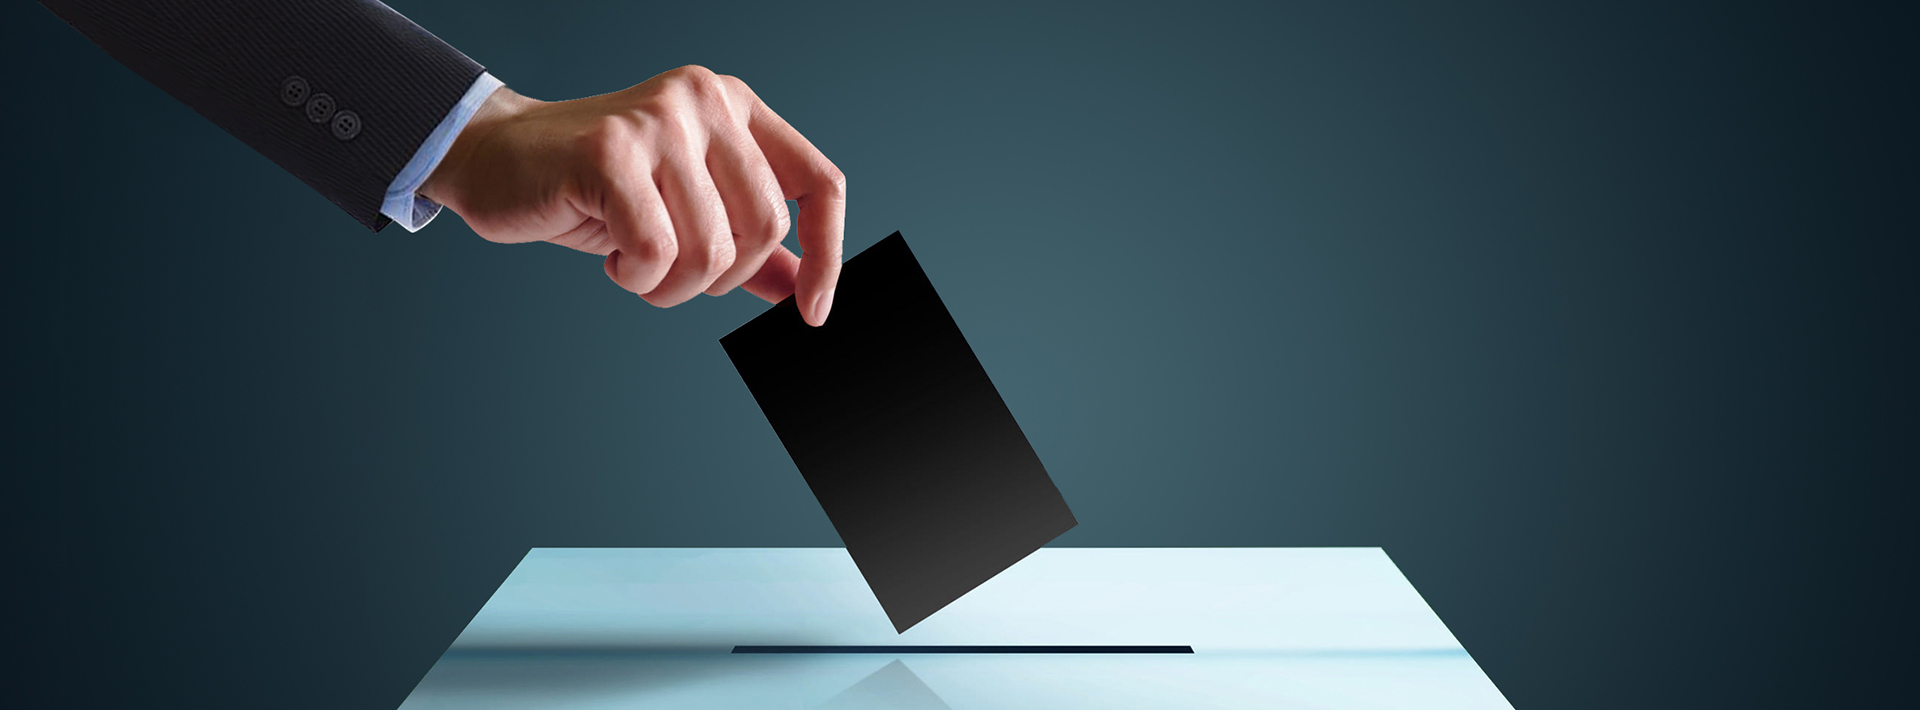 Electronic Voting